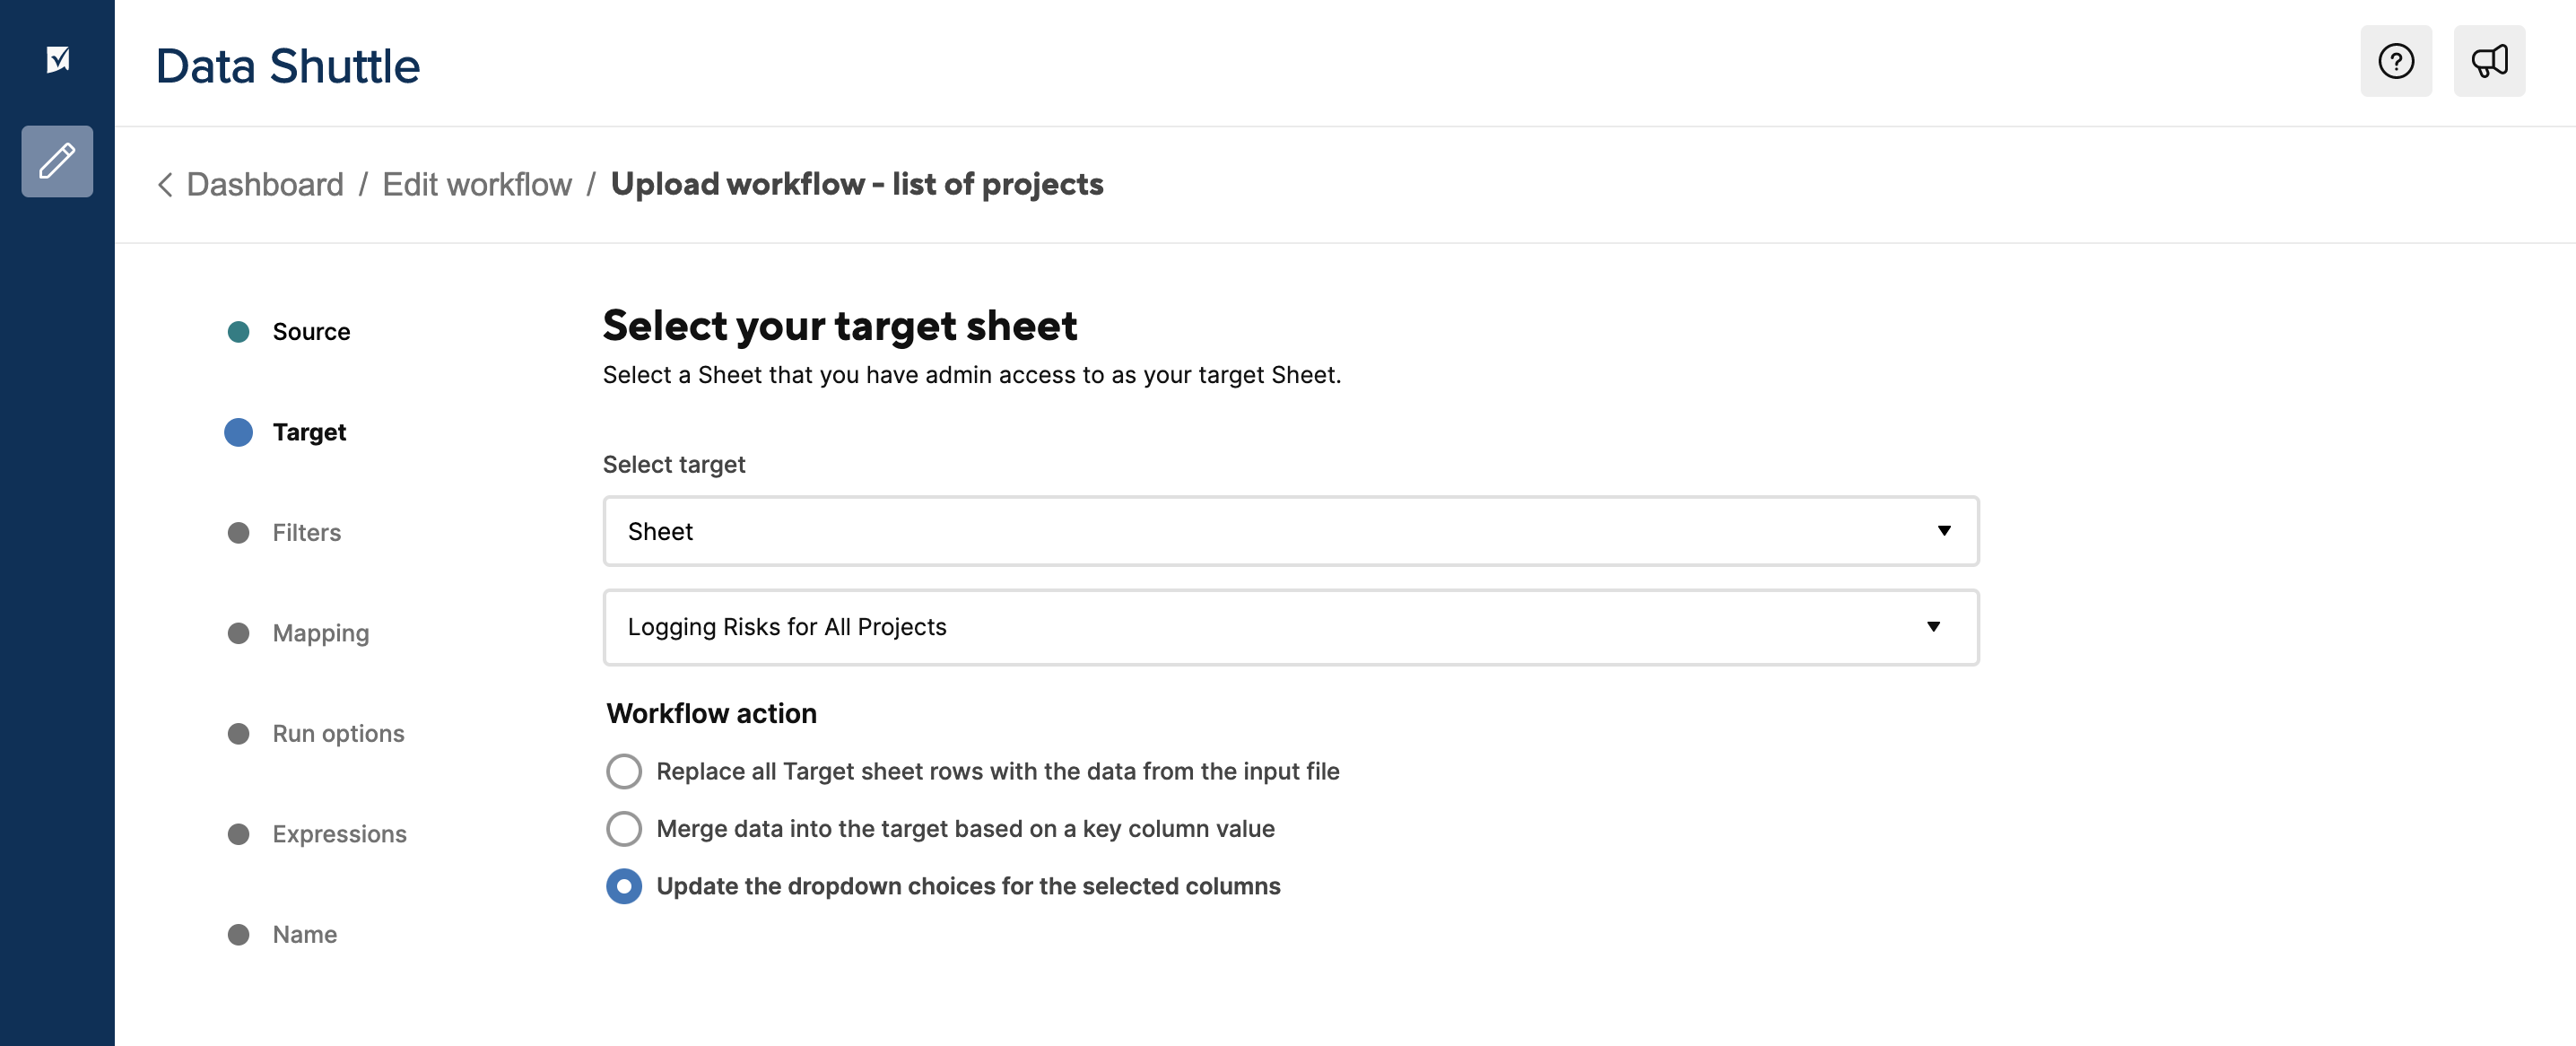 Image showing the "Select your target sheet" screen, where the option "Update the dropdown choices for the selected columns" is selected.